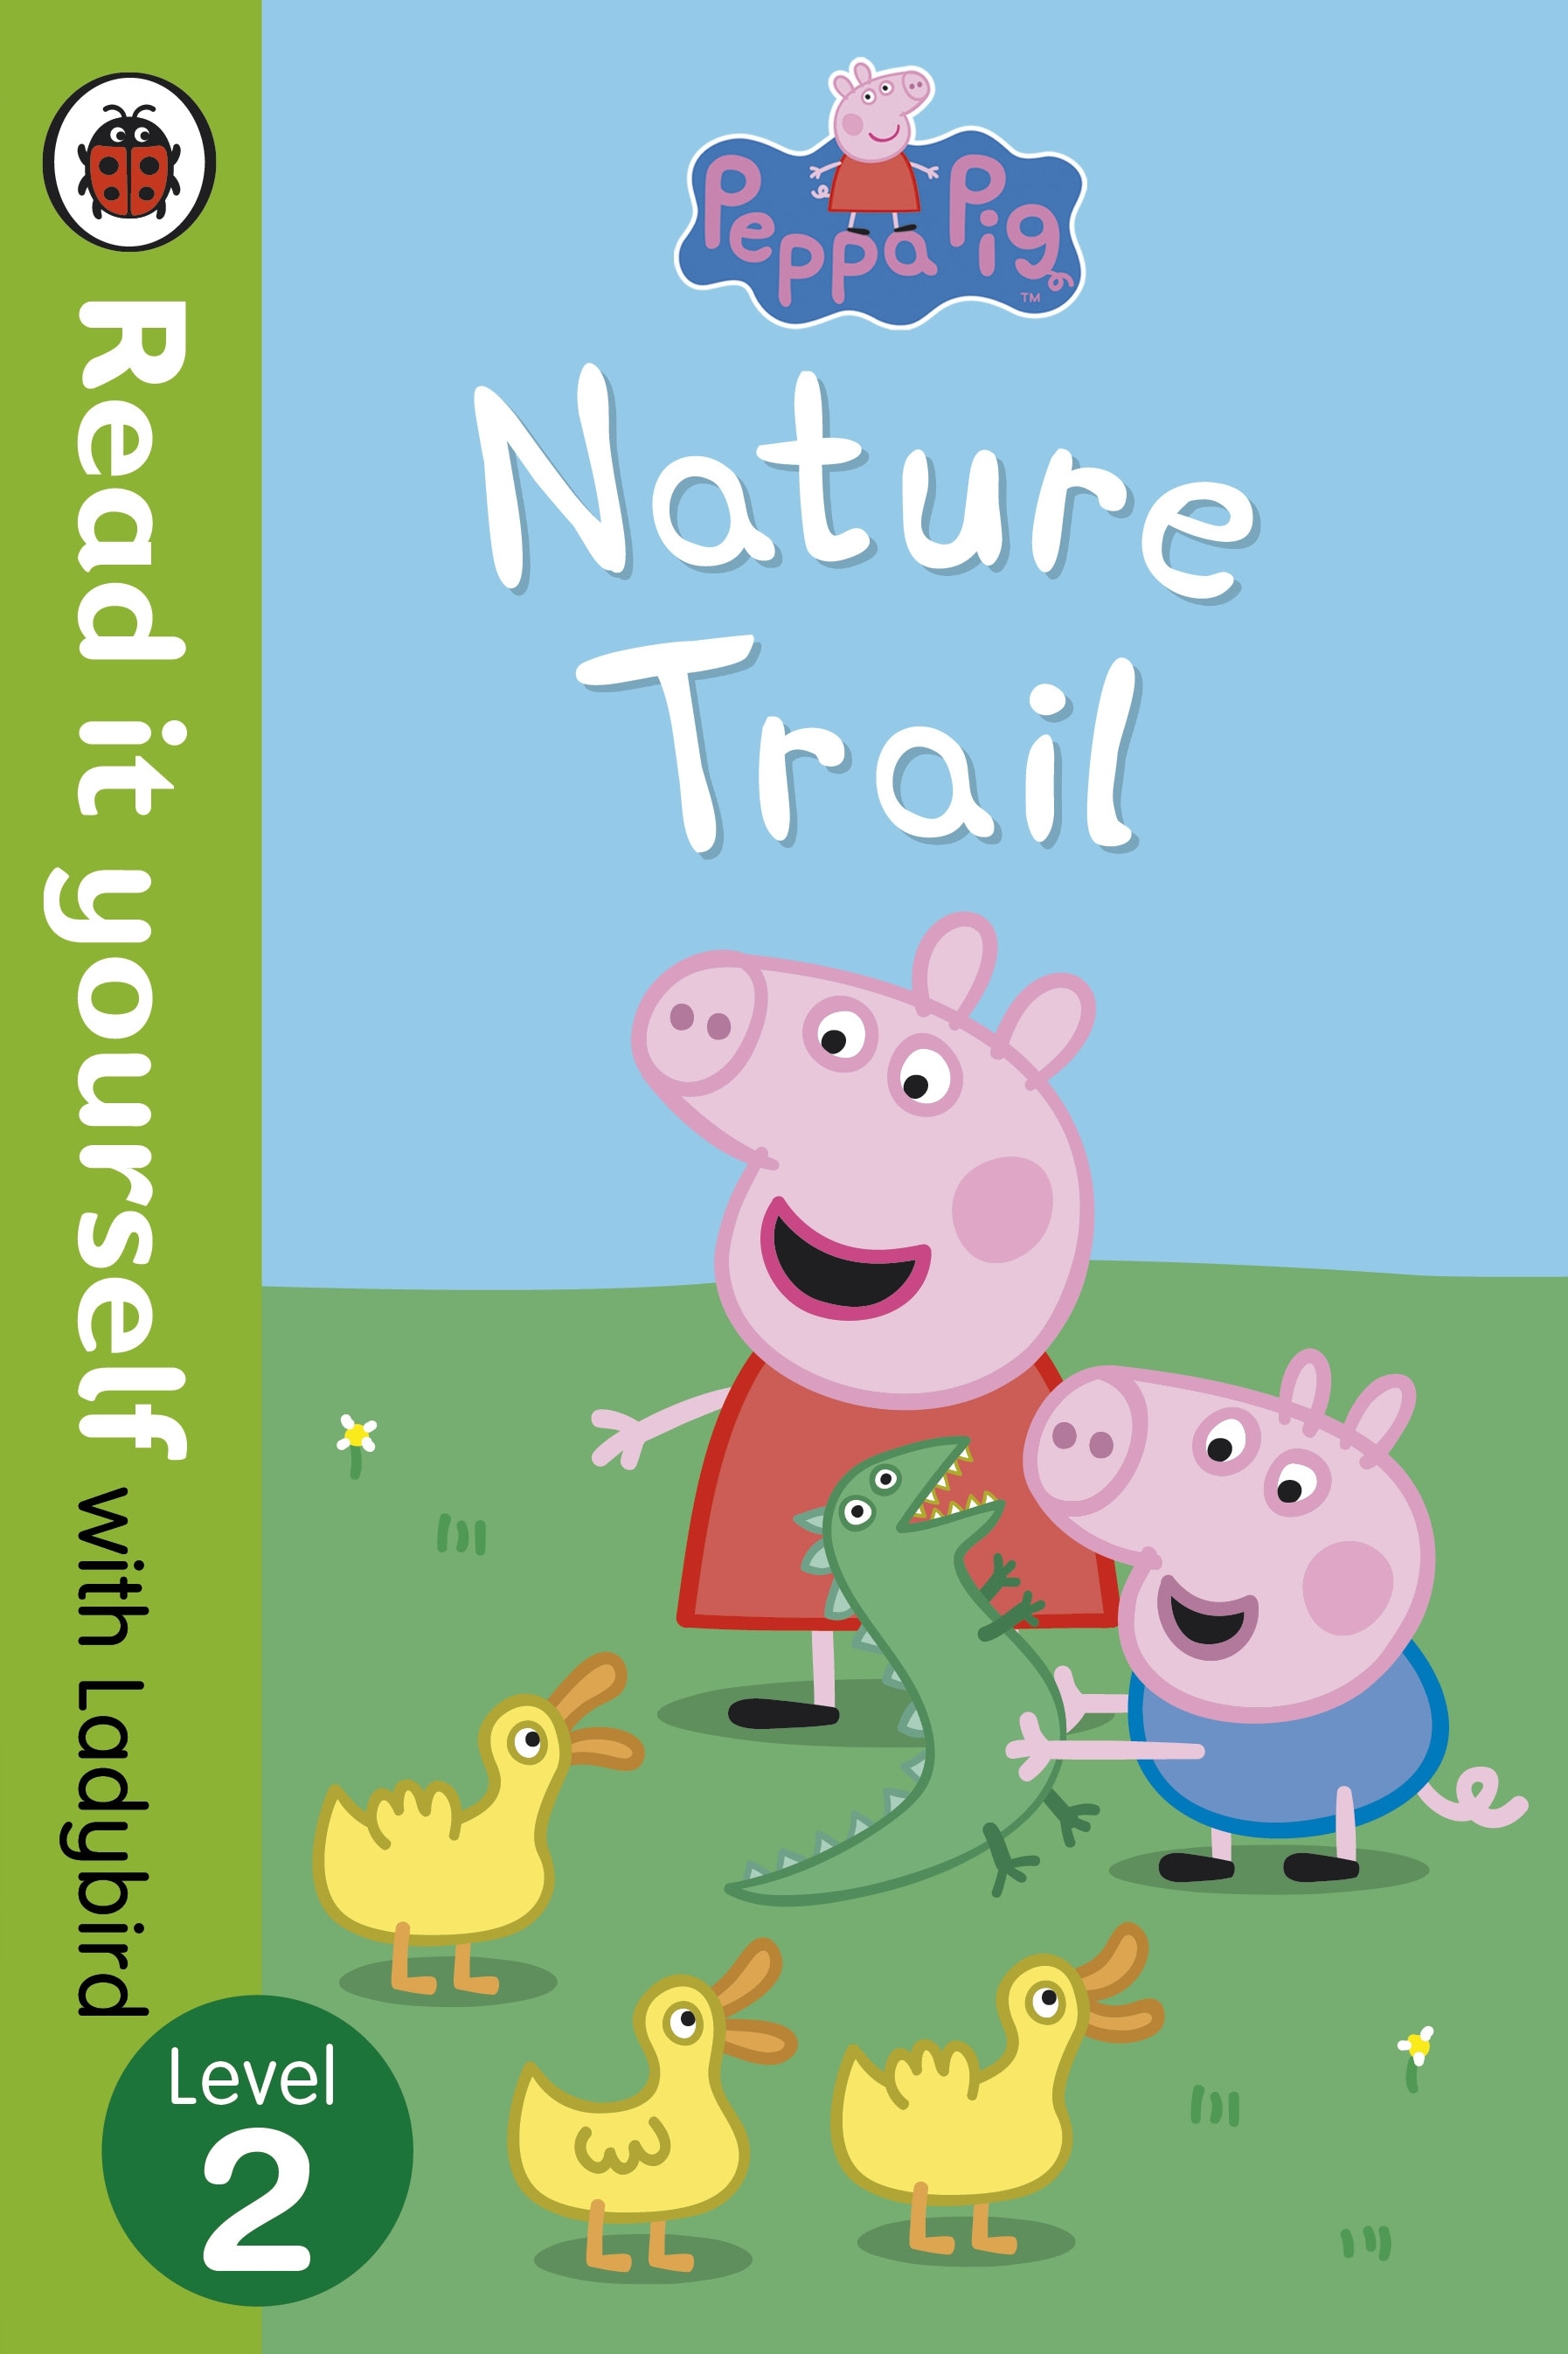 Book “Peppa Pig: Nature Trail - Read it yourself with Ladybird” by Ladybird, Peppa Pig — July 4, 2013